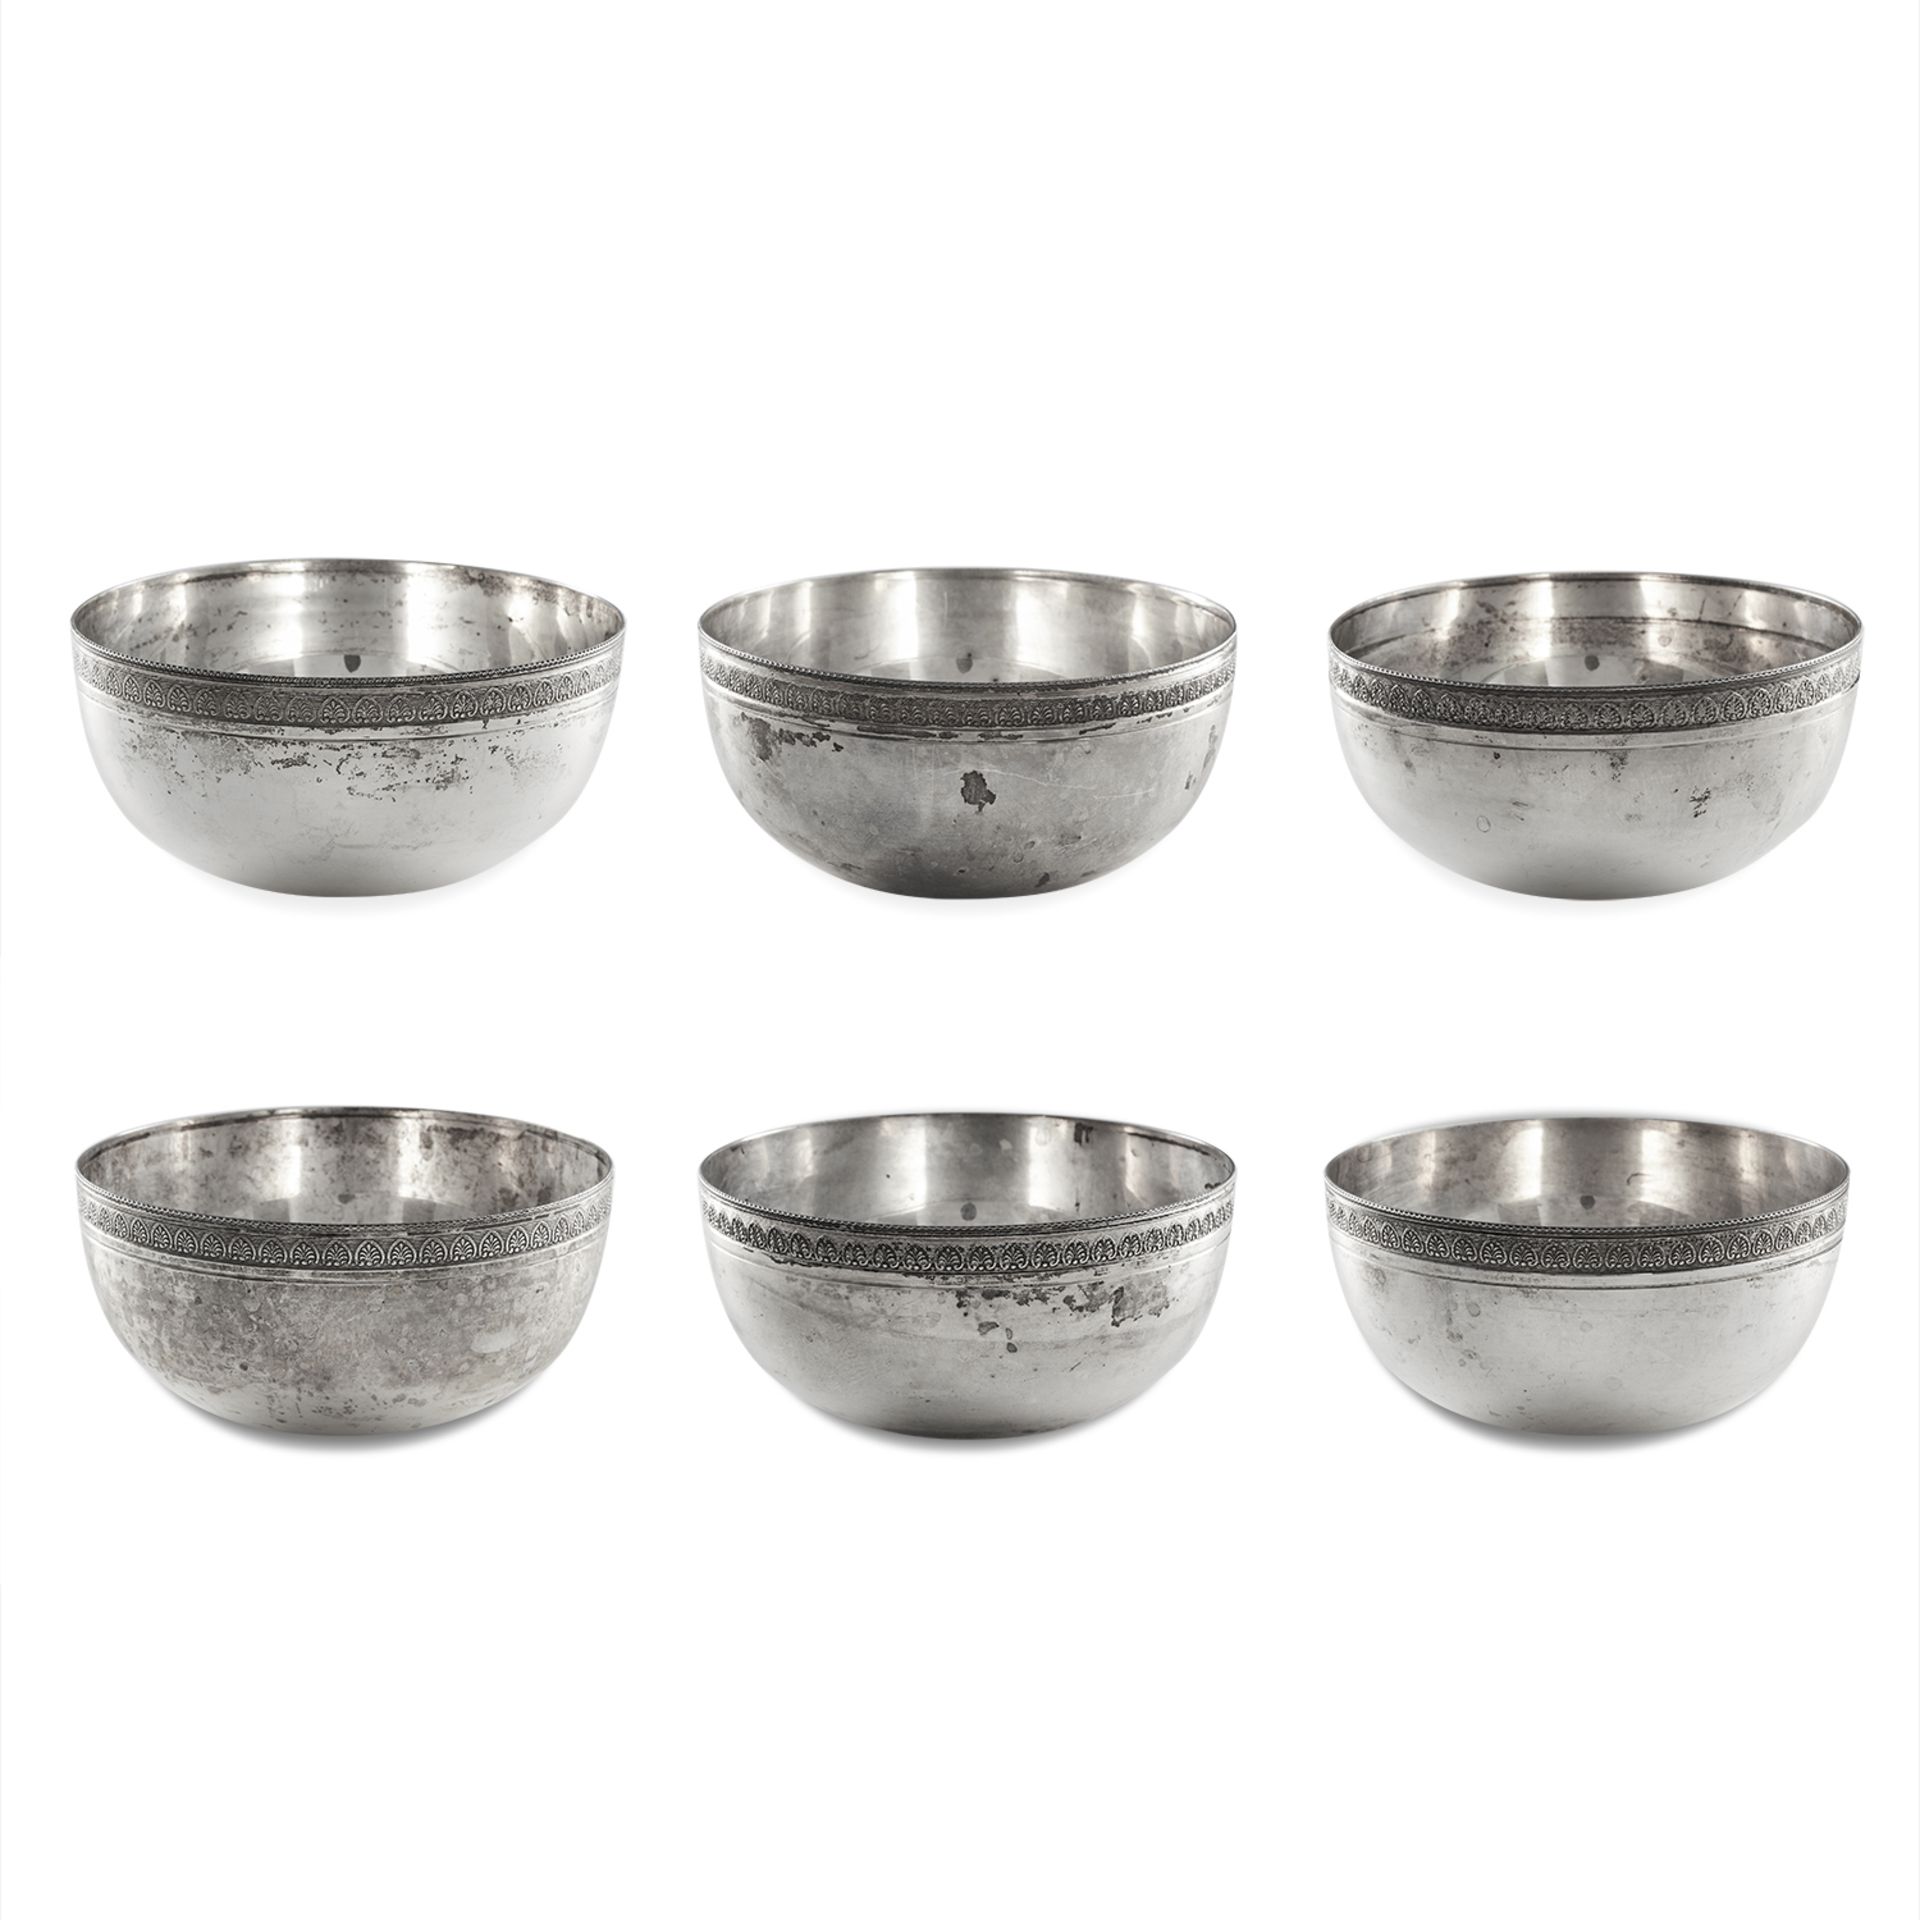 A SET OF SIX LEBANESE SILVER BOWLS / DISHES each of circular design with a foliate border, 11.0cm,